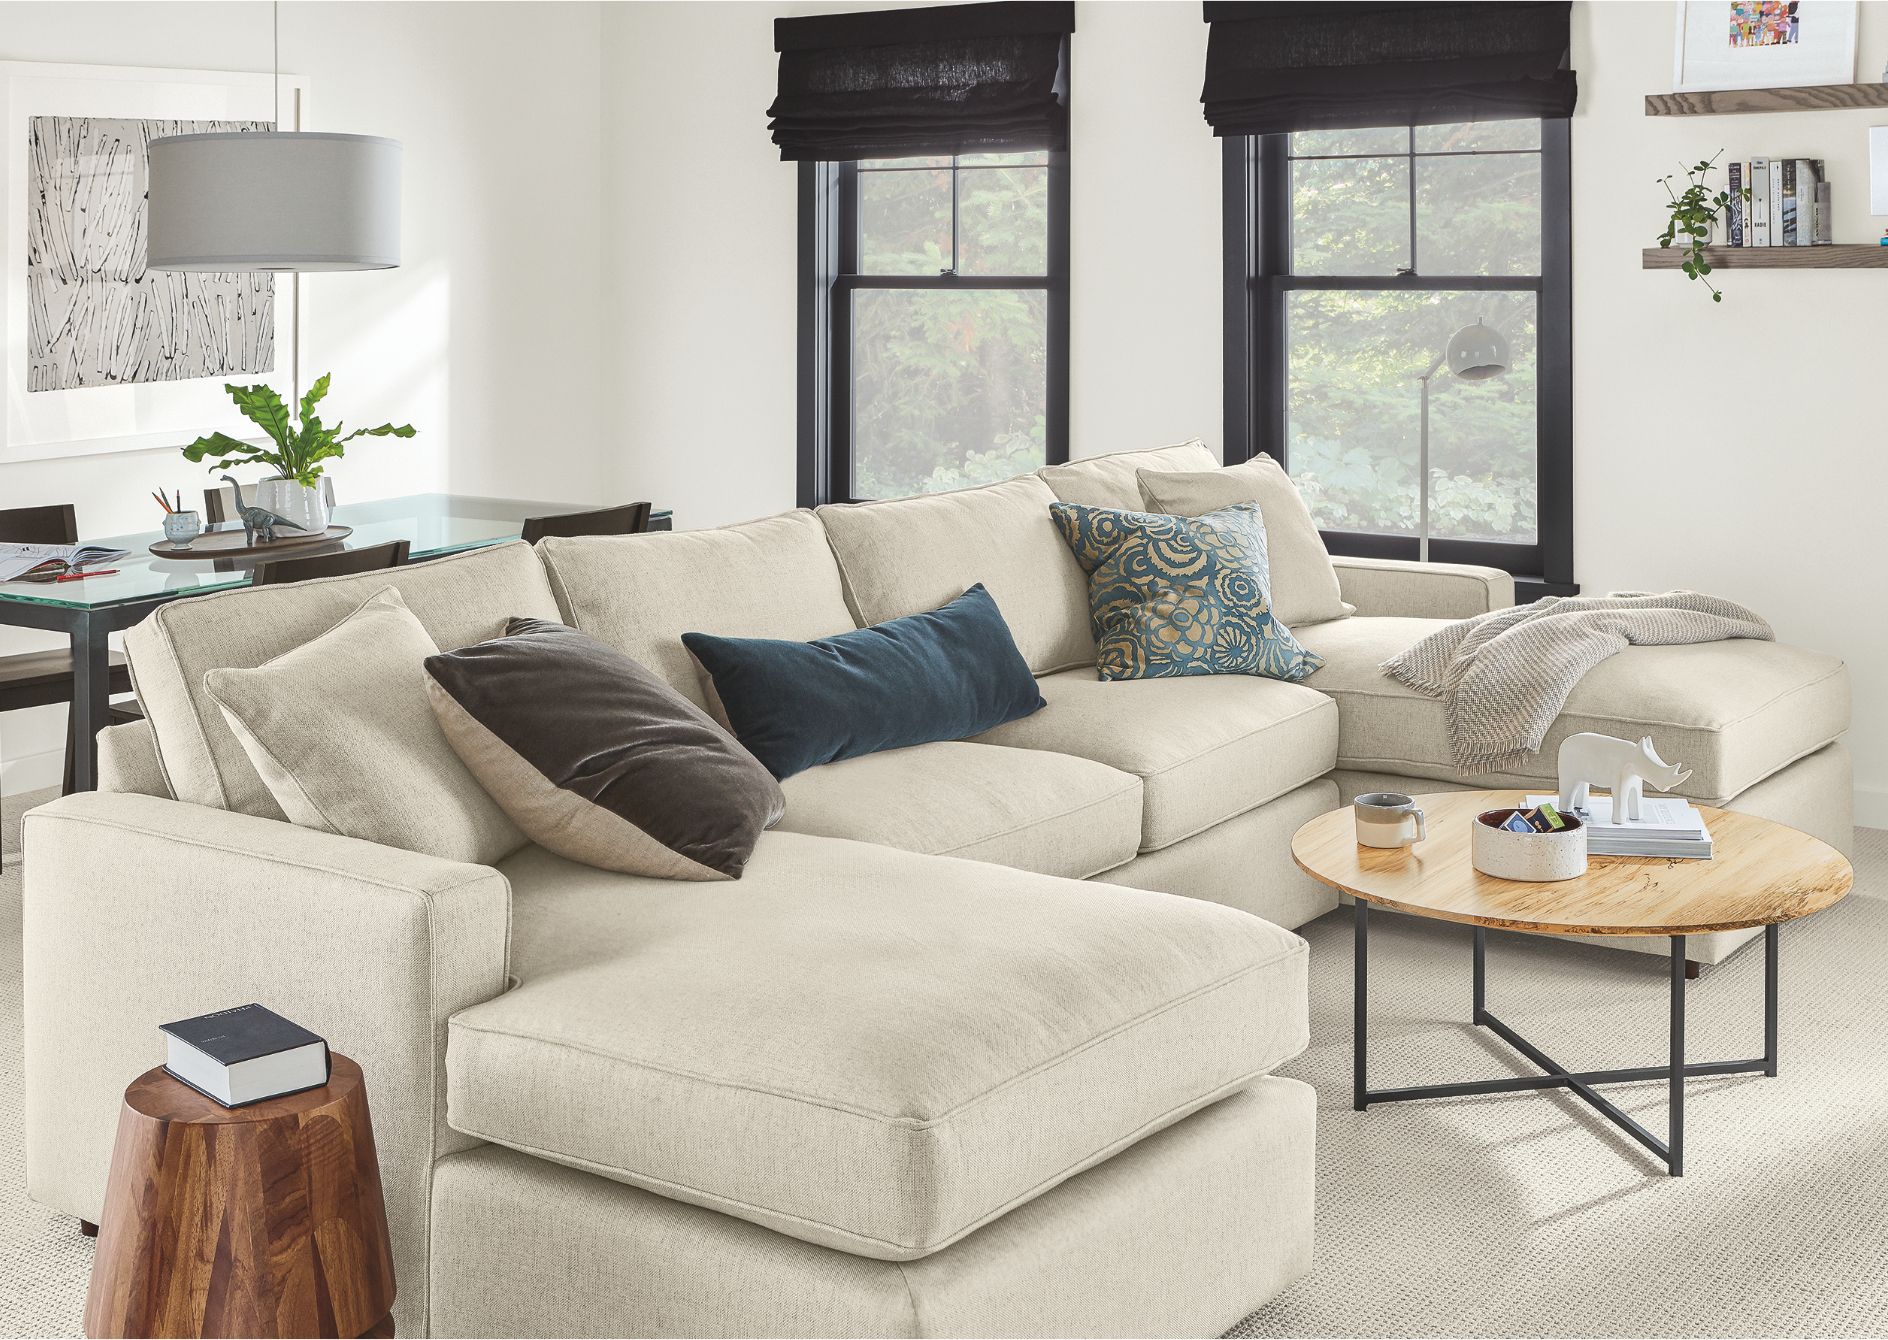 How To Arrange Sectional Sofa In Small Living Room | www.resnooze.com